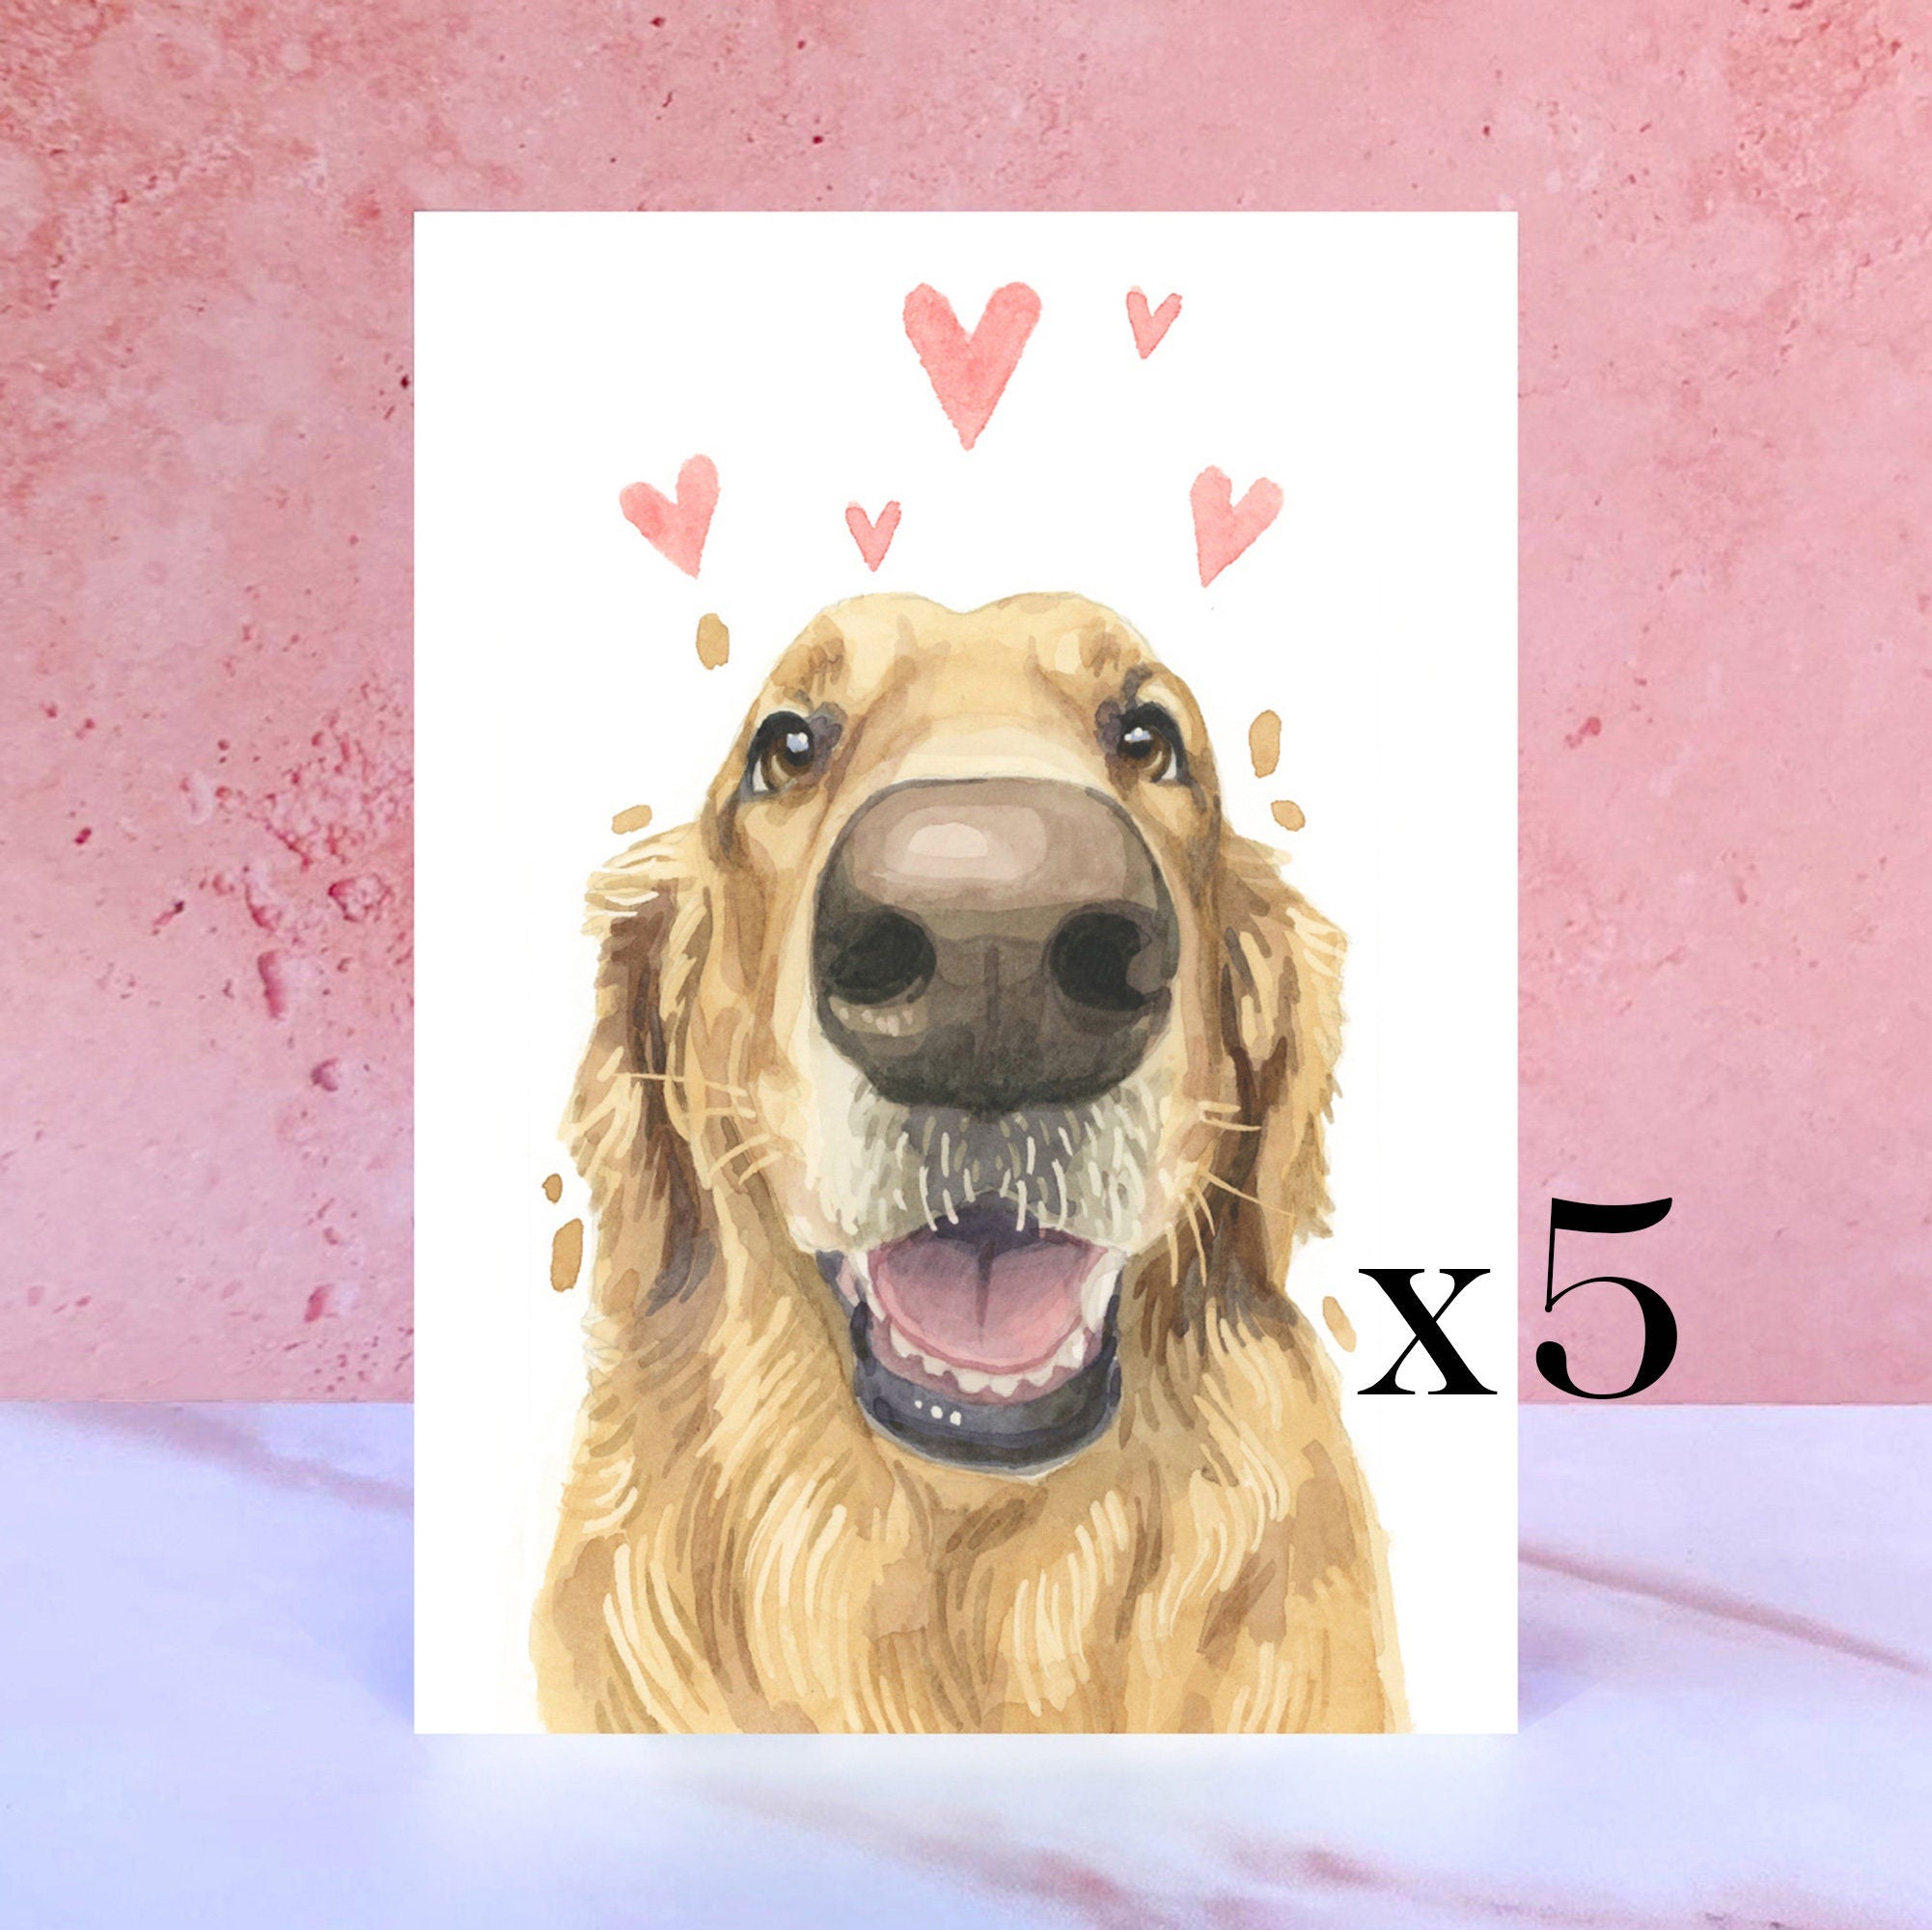 Pack of 5 Golden Retriever Licks & Kisses Card for Valentines, Anniversaries and from the Dog